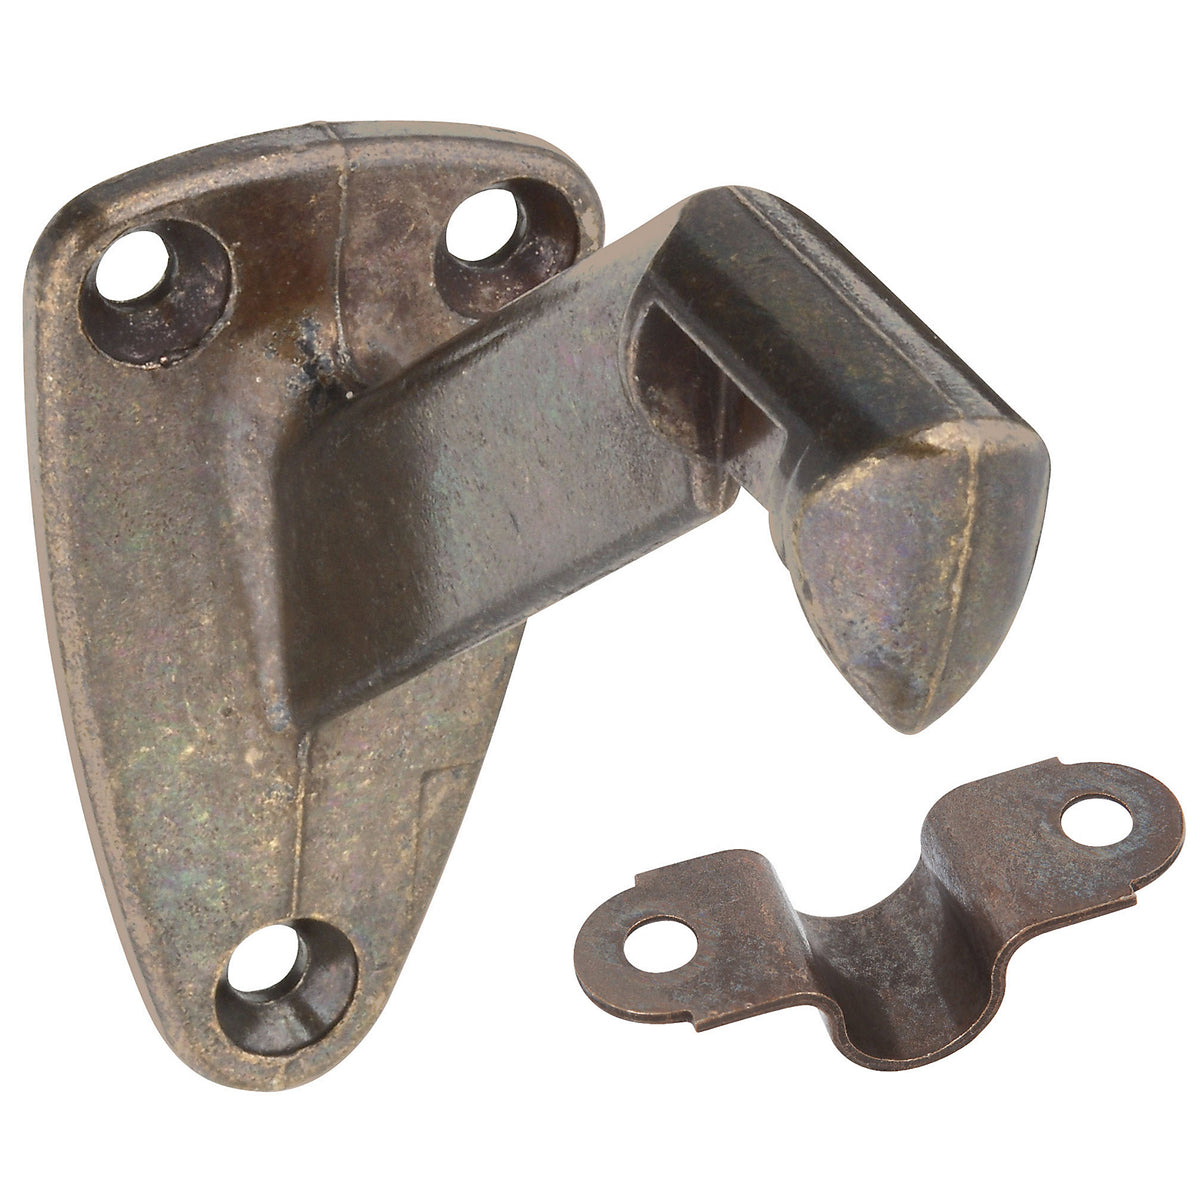 buy hand rail brackets & home finish hardware at cheap rate in bulk. wholesale & retail construction hardware supplies store. home décor ideas, maintenance, repair replacement parts